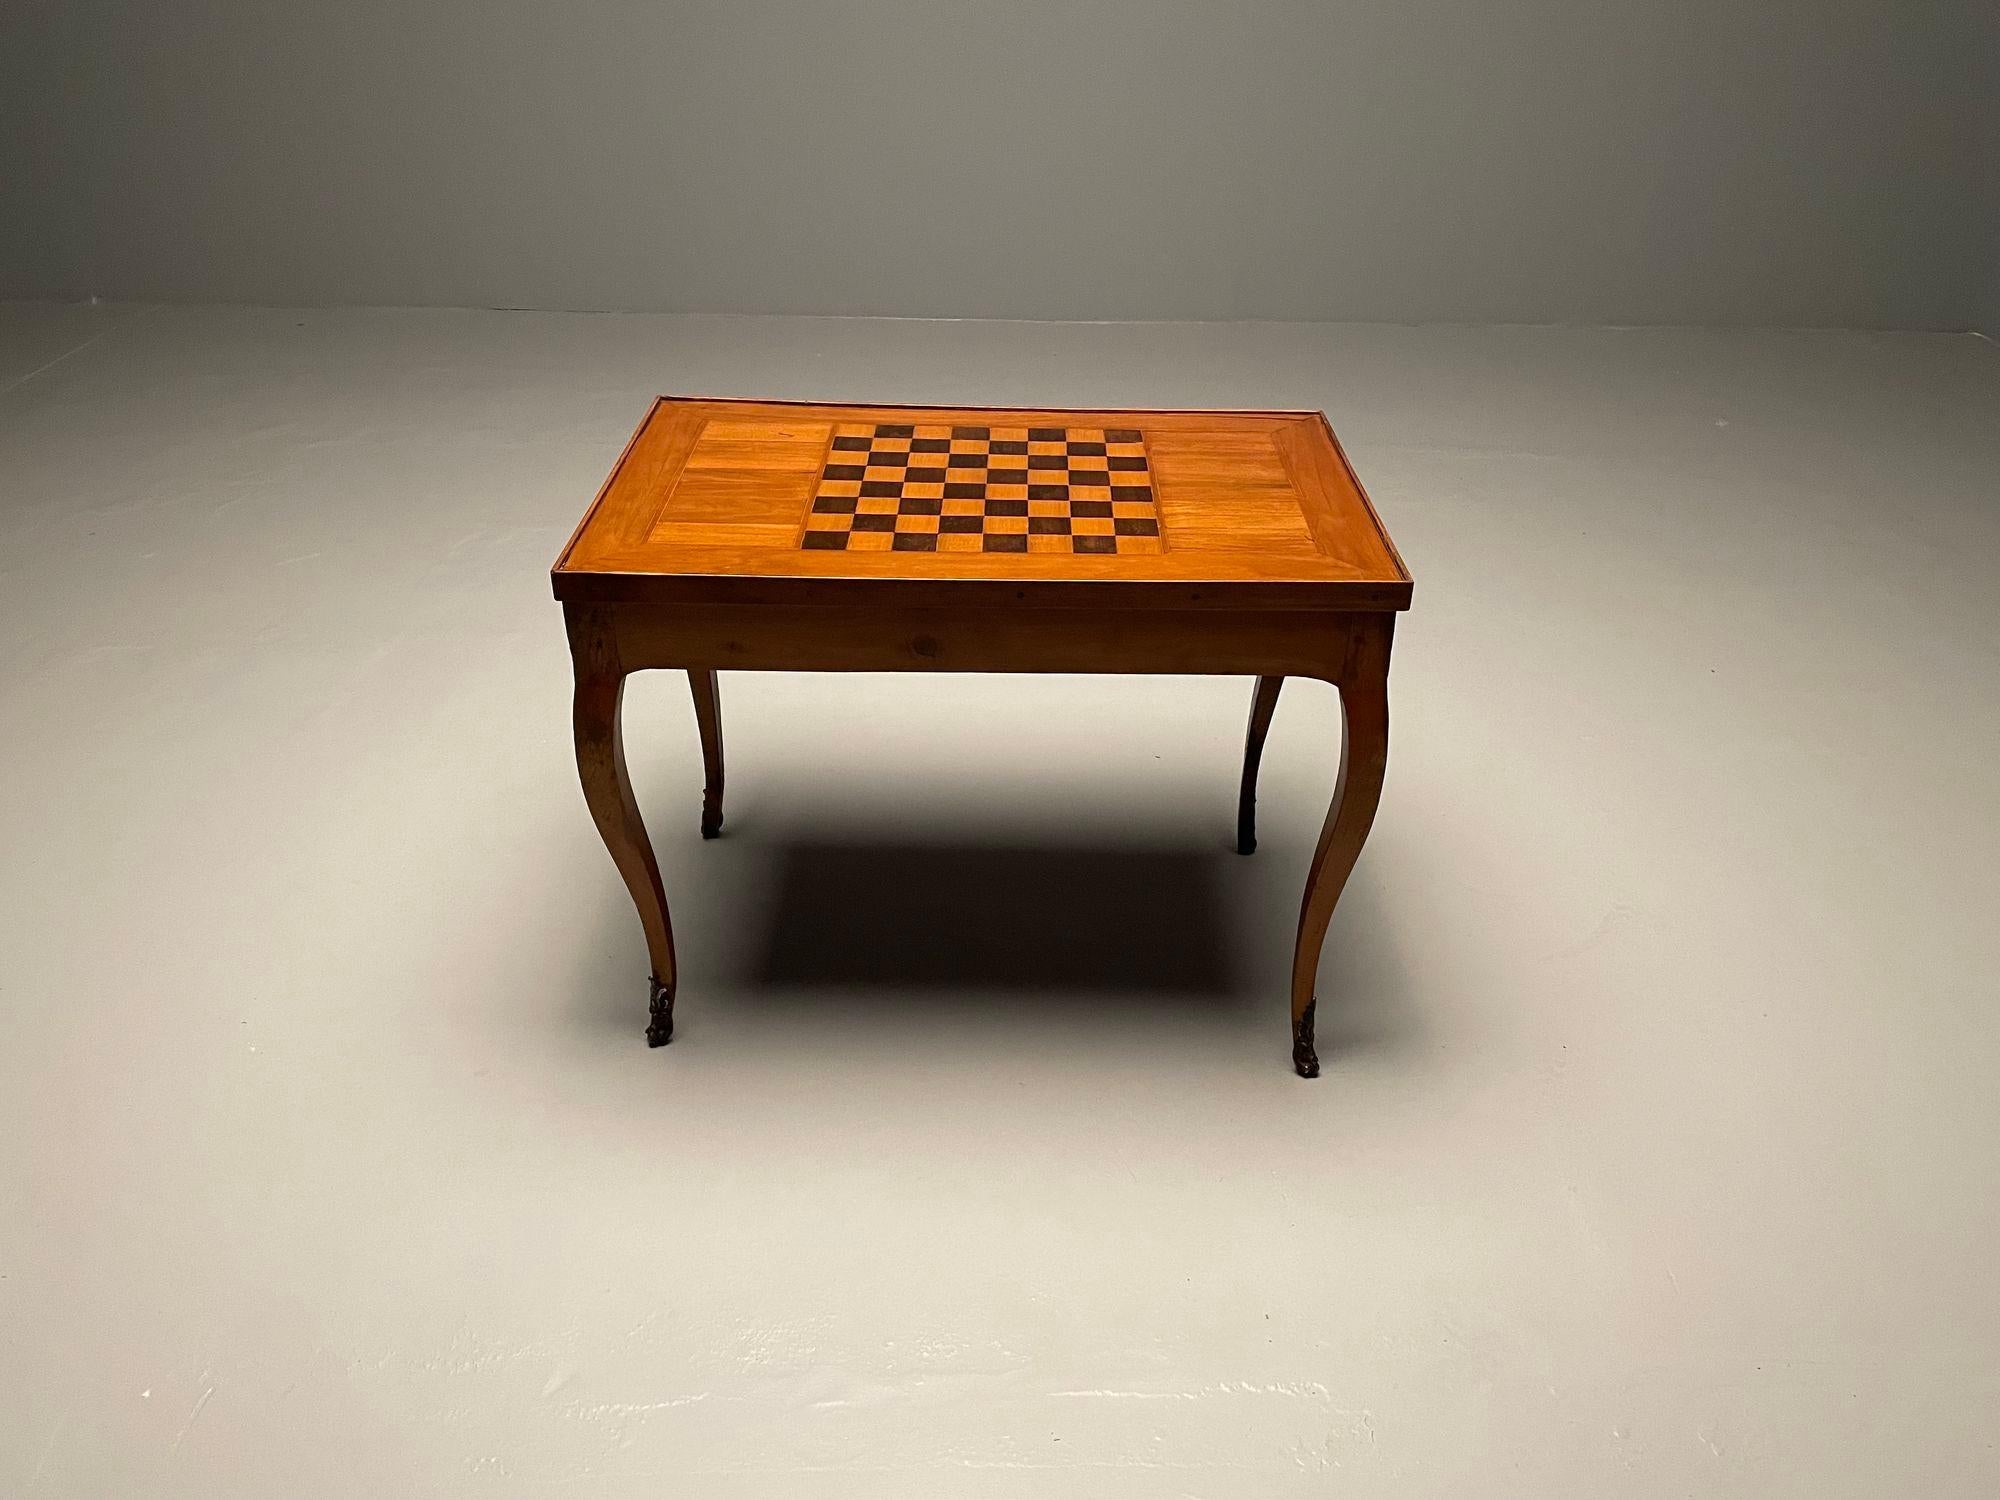 A French Tric-Trac Table, Antique Game / Backgammon Table, Tooled Leather Top, 18th / 19th Century

A Rare and Fine Late 18th Early 19th Century Games Table. Mortise and Tenon construction on this wonderful stunning one of a kind games table having